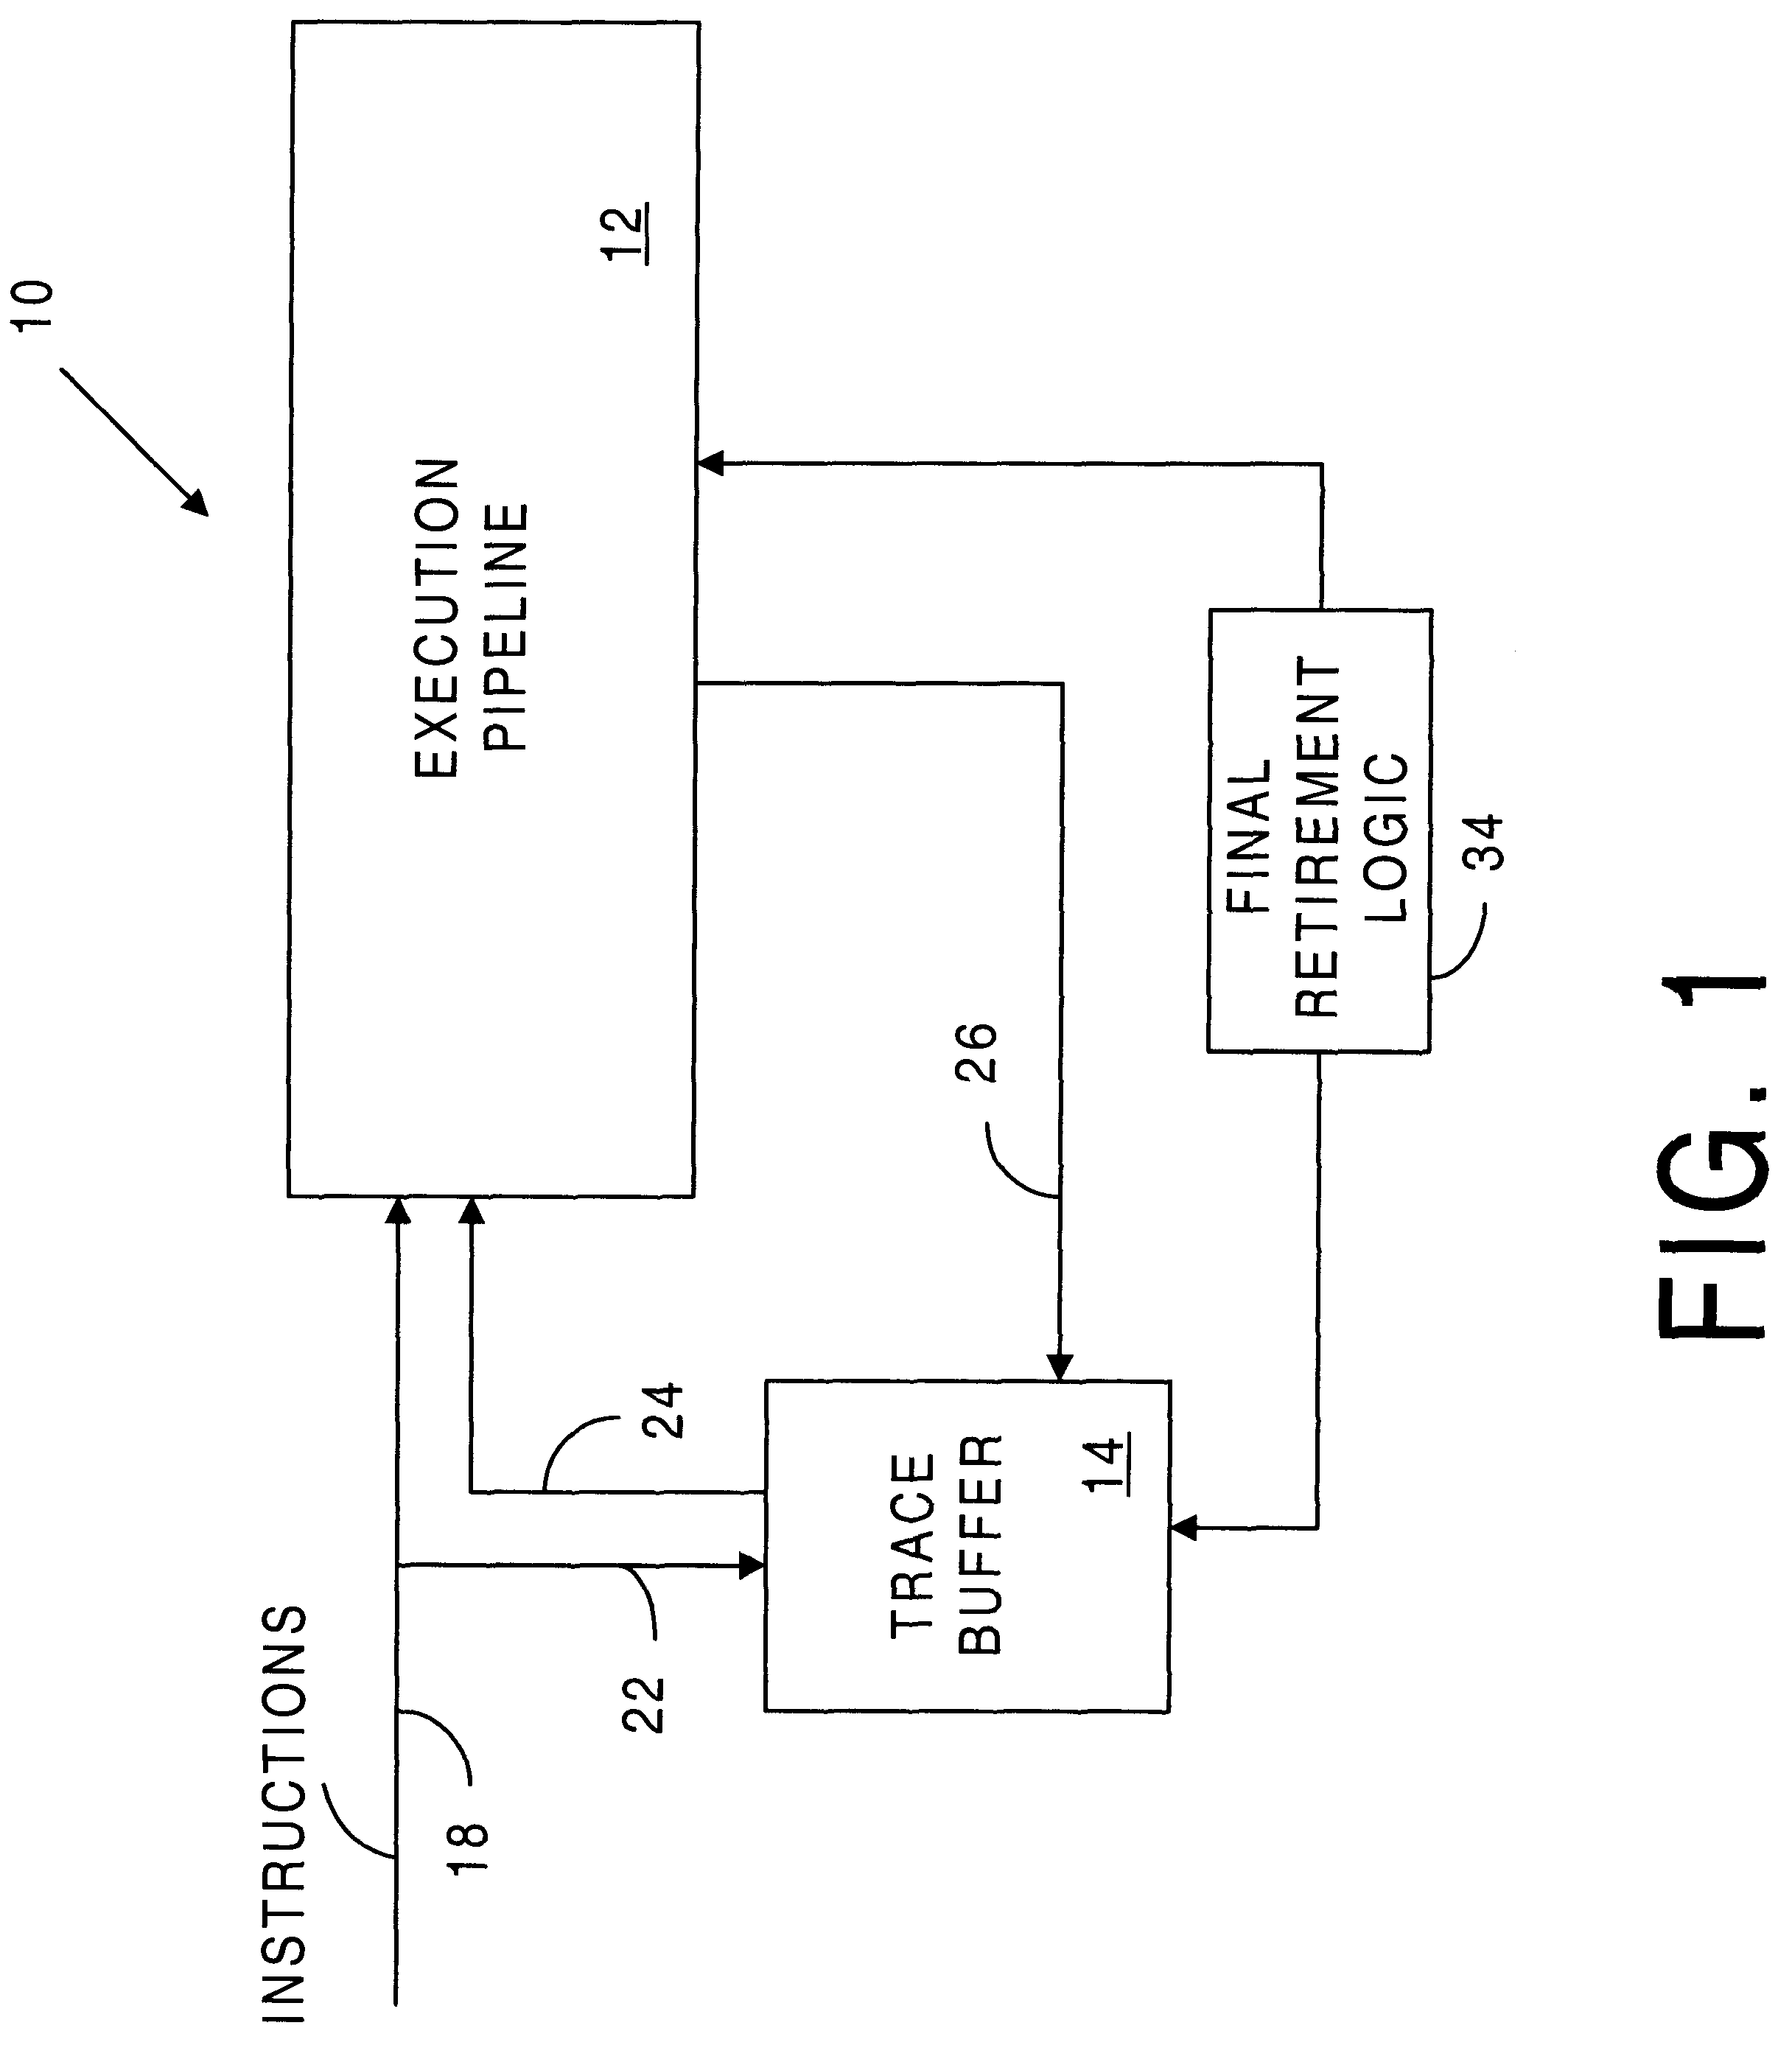 Memory system for ordering load and store instructions in a processor that performs multithread execution